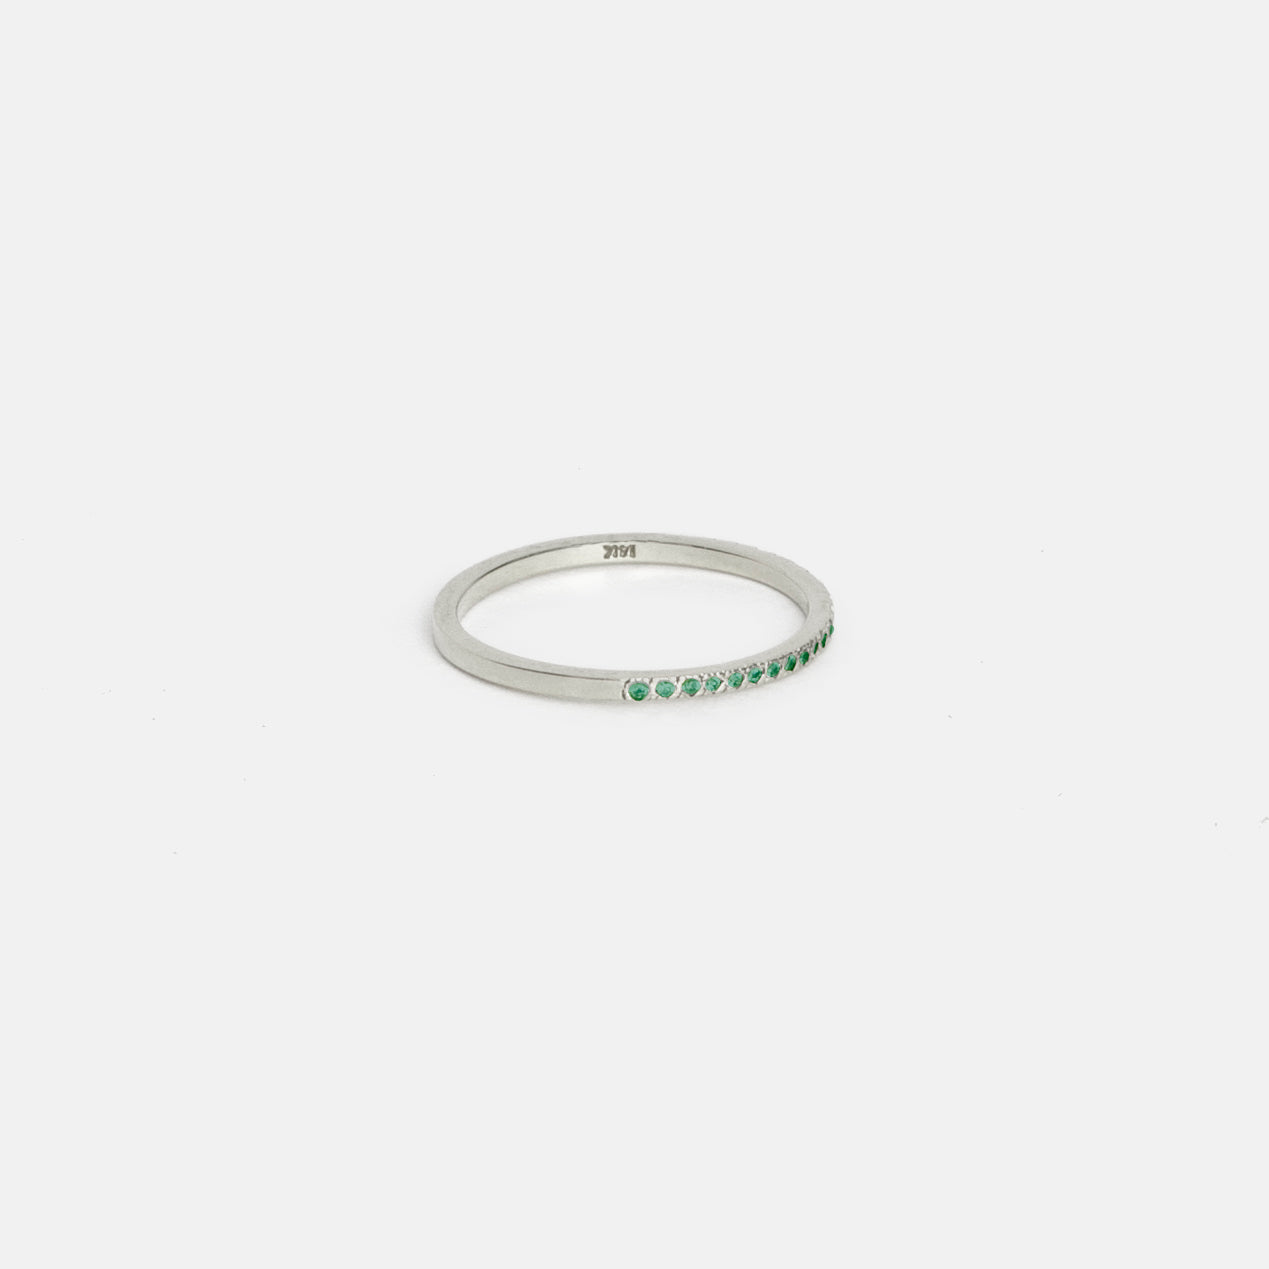 Eile Designer Ring in 14k White Gold set with Emeralds By SHW Fine Jewelry New York CIty